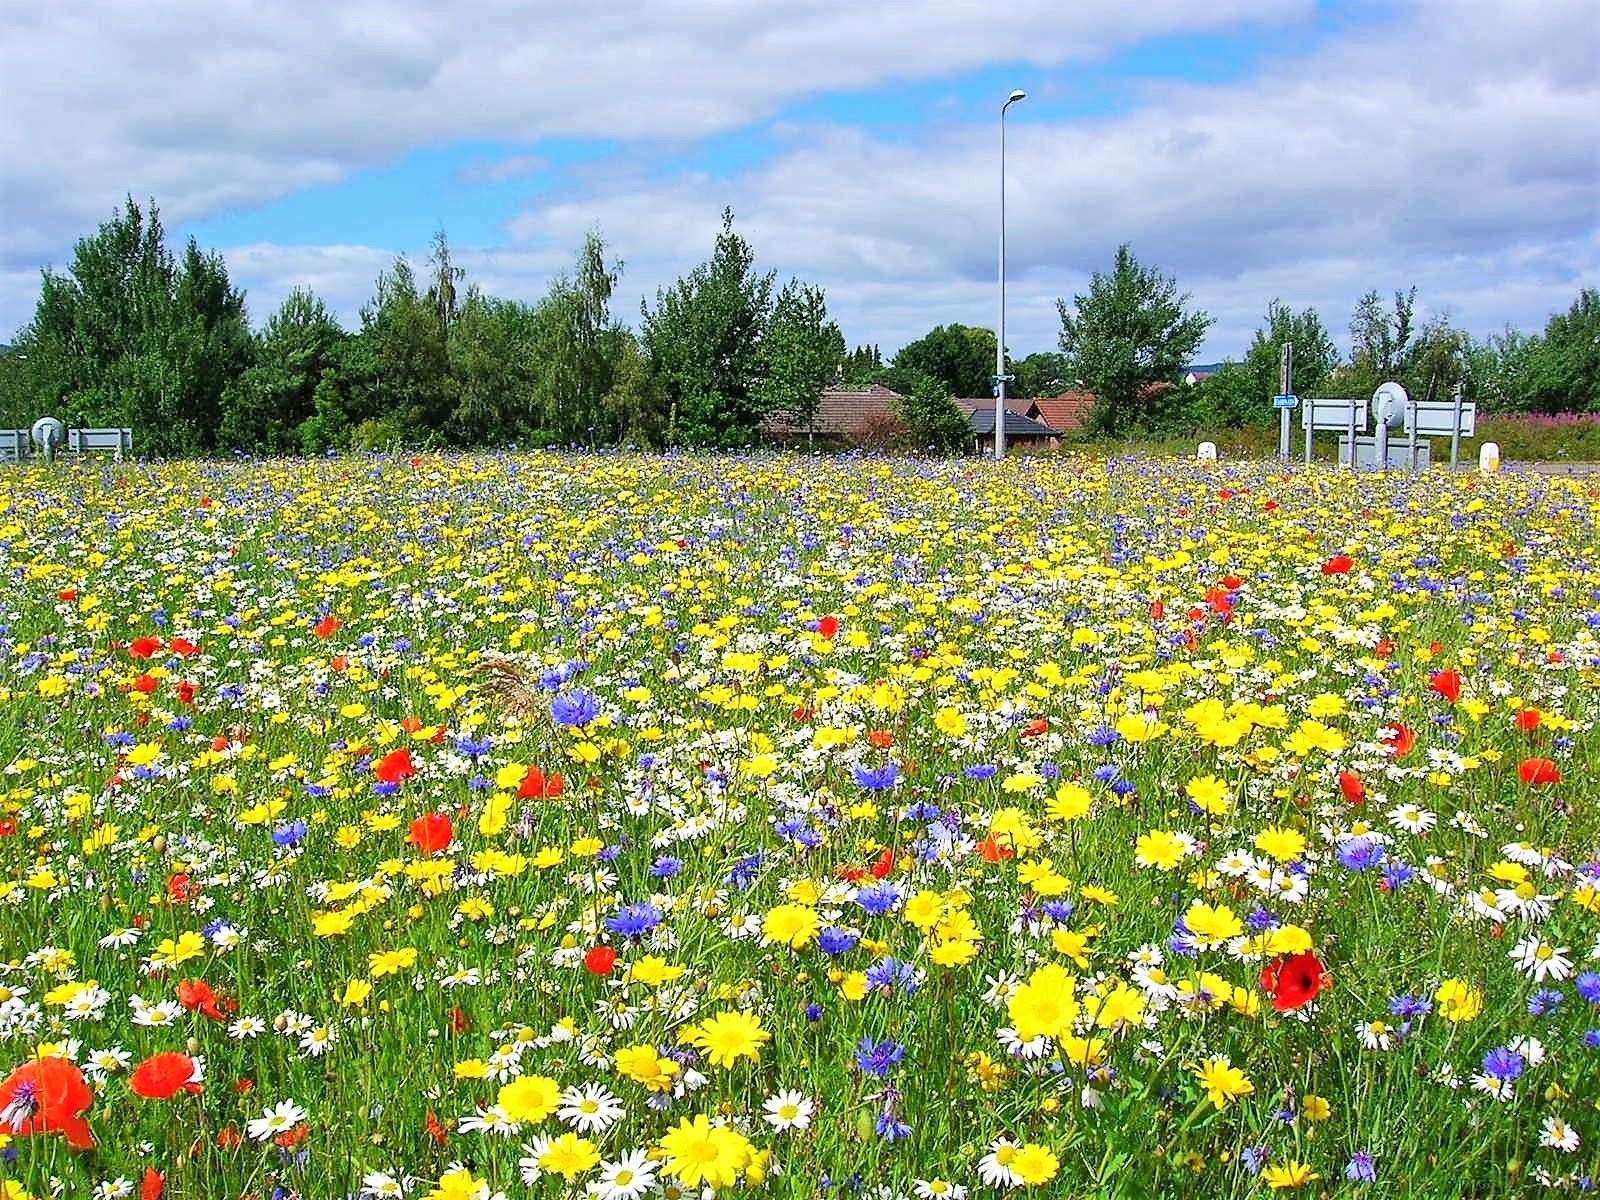 Wildflower meadows like this show that Highland Council is embracing the climate change agenda by increasing the amount of 'set aside' and wildlife corridors across the area.